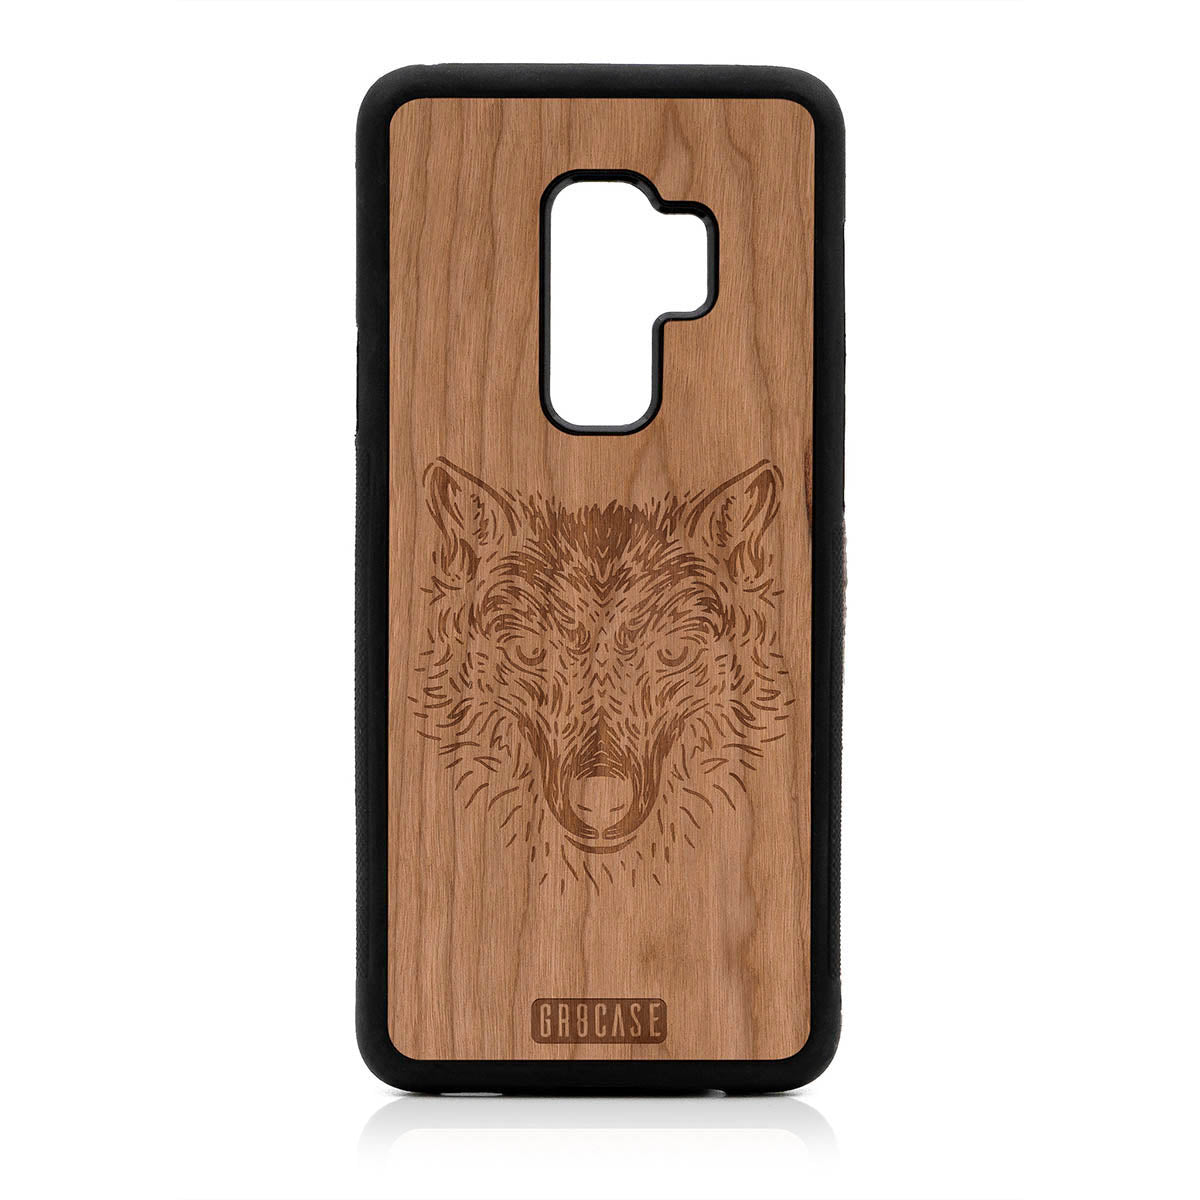 Furry Wolf Design Wood Case For Samsung Galaxy S9 Plus